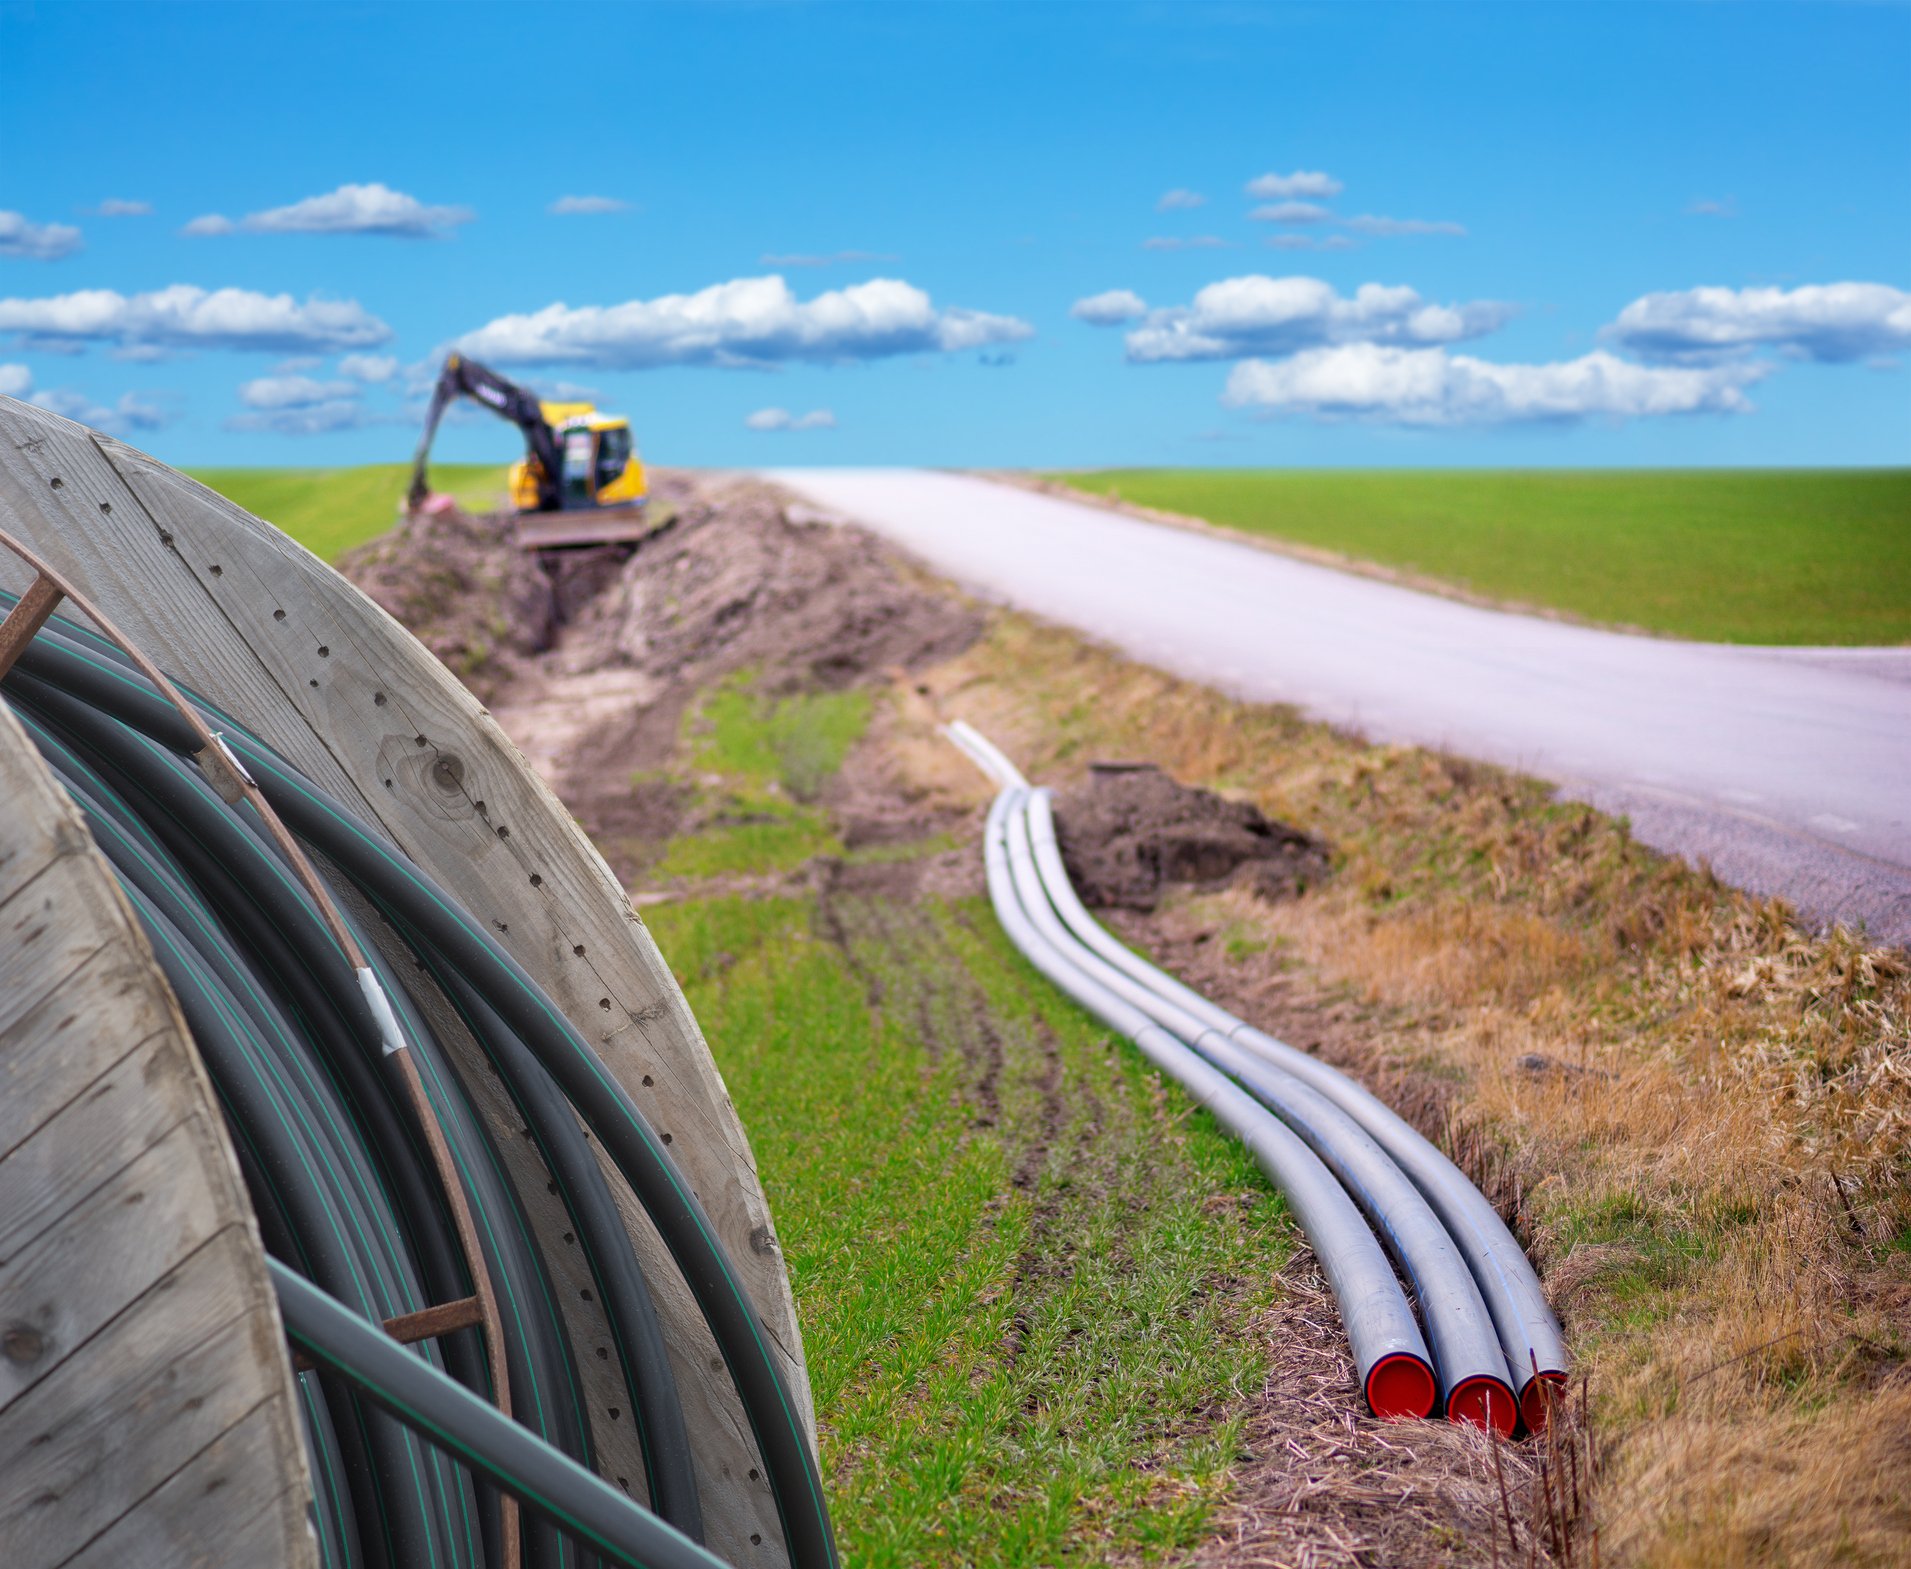 AT&T thinks its public-private fiber builds could be a model for BEAD projects - FierceTelecom